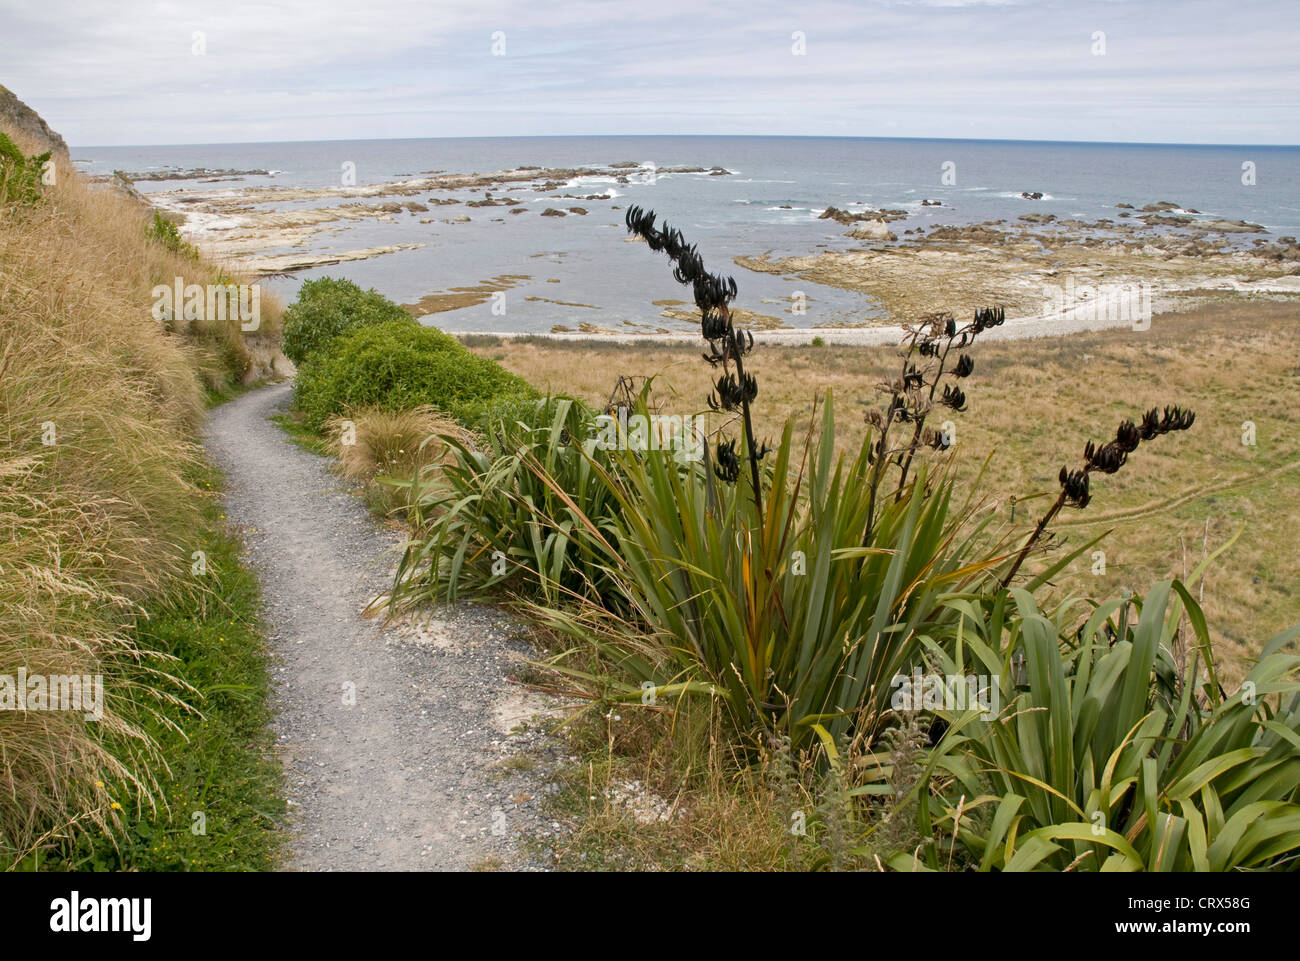 Pacific coastline of the Kaikoura Peninsula in the South Island of New Zealand Stock Photo